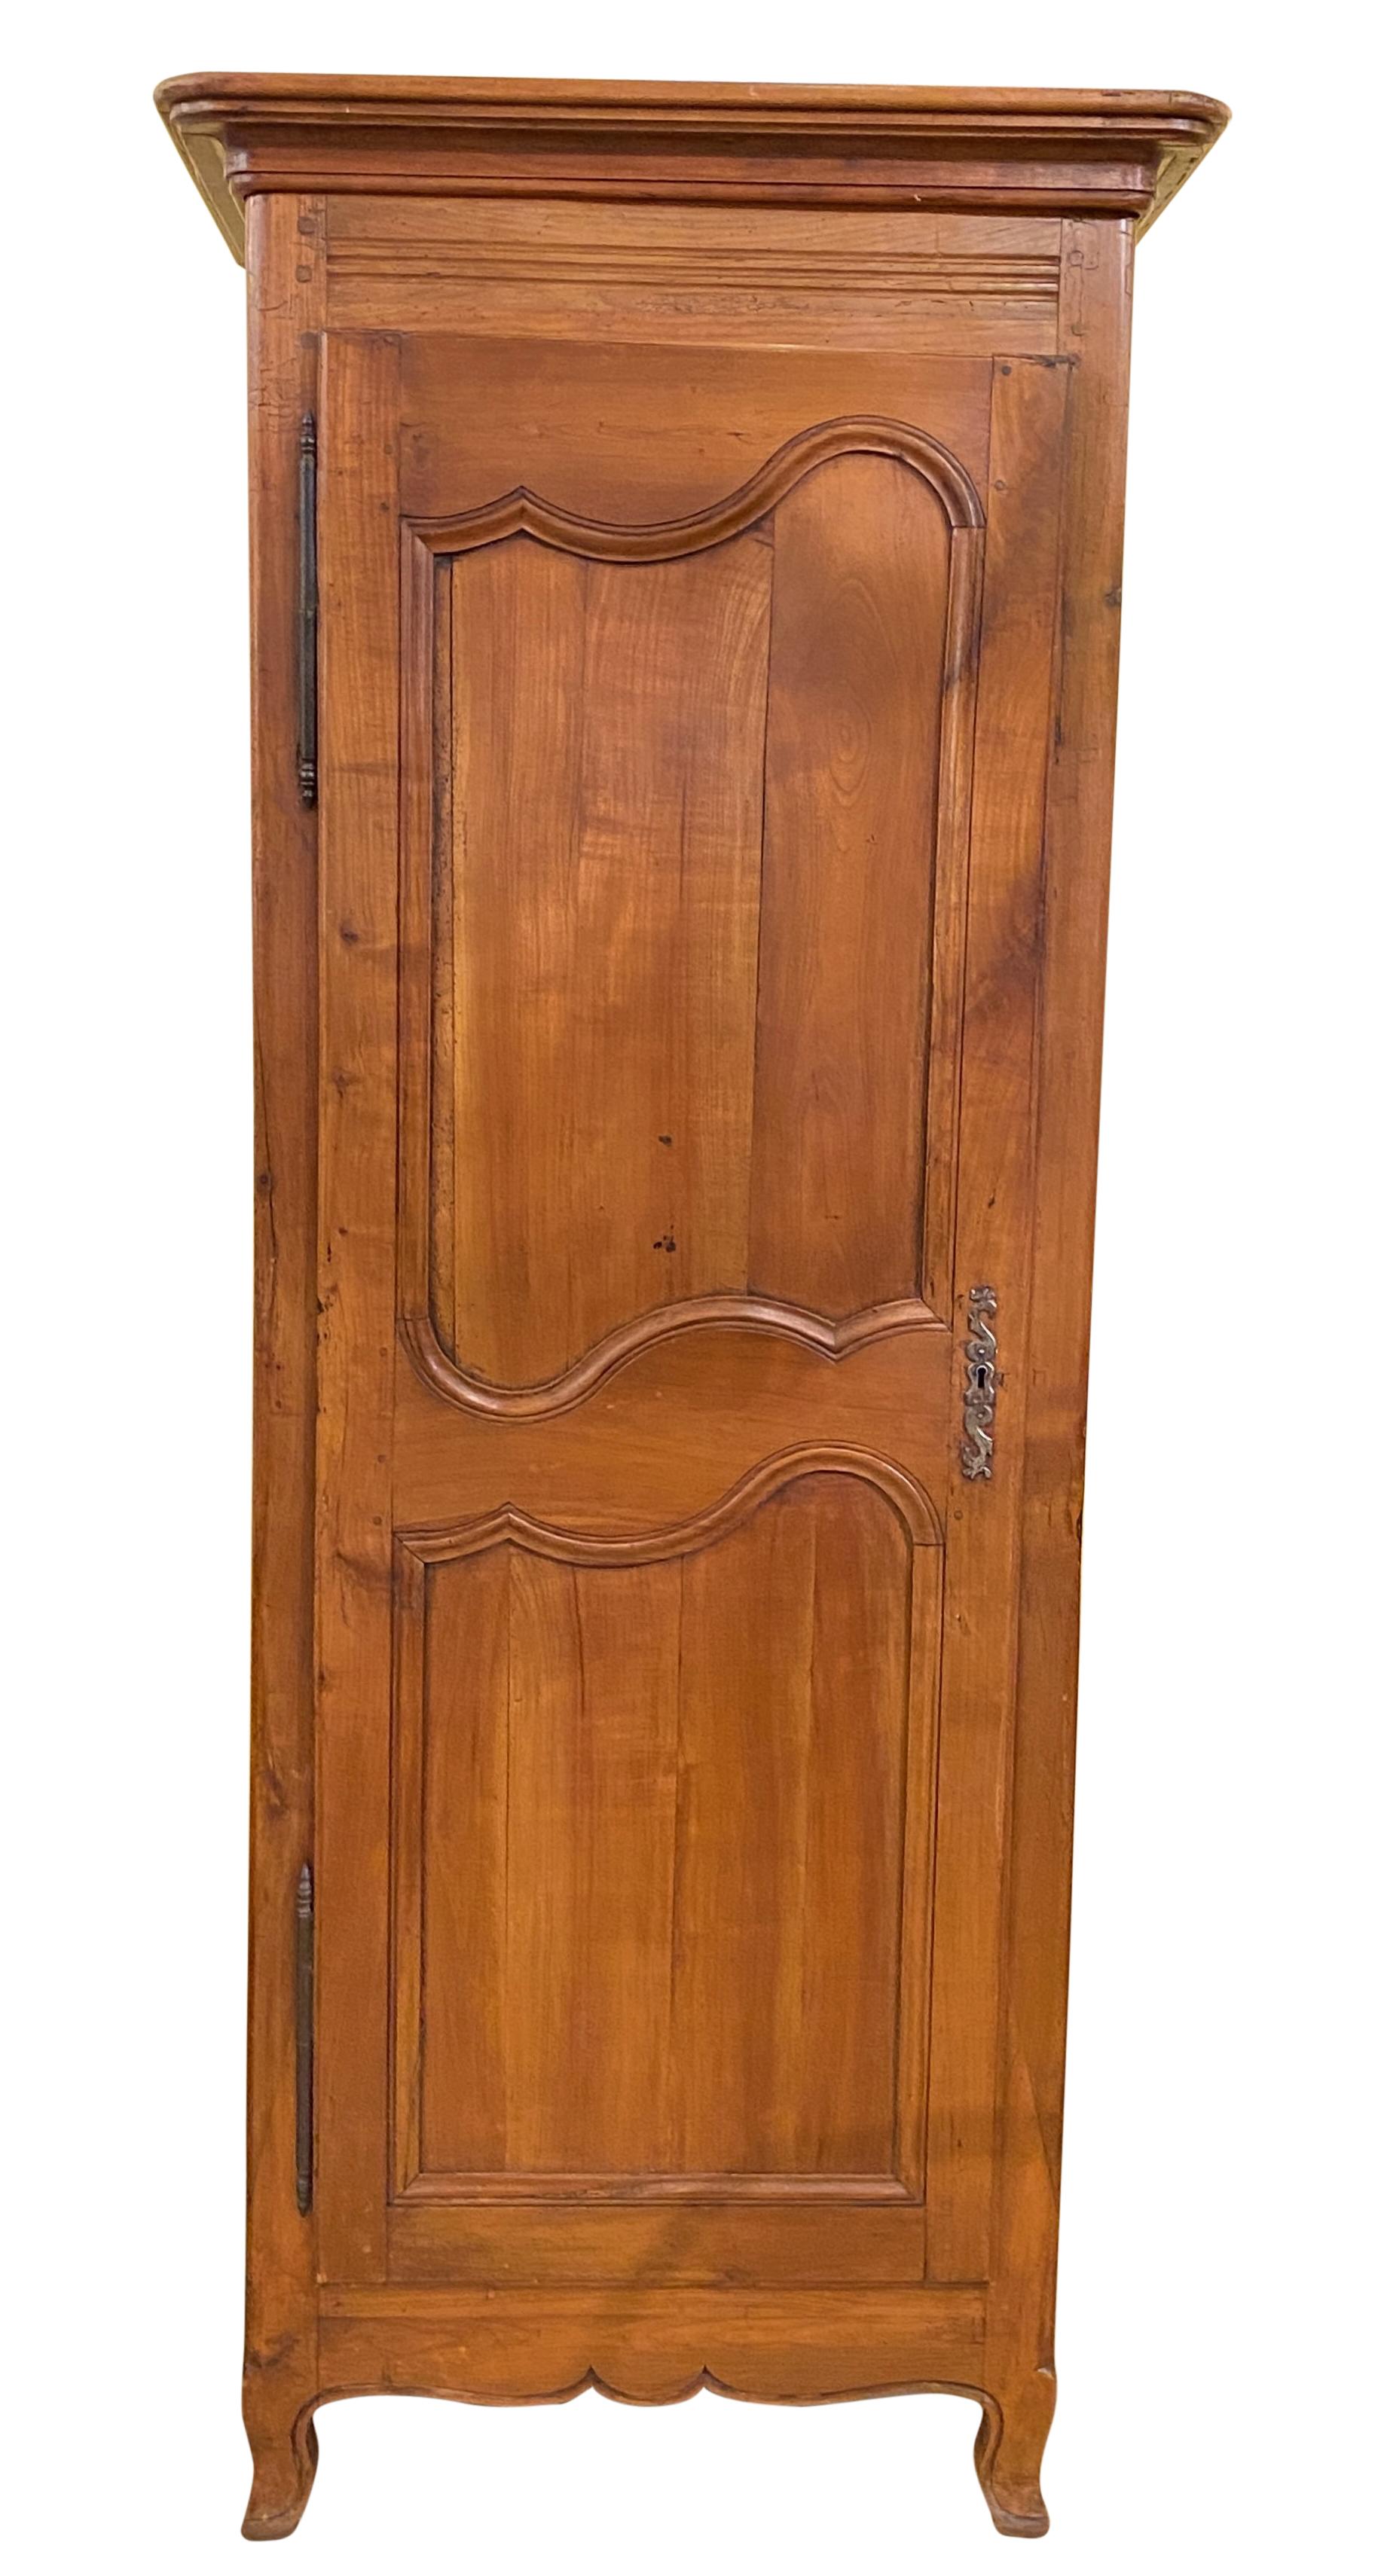 French Provincial 18th Century French Cherry Wood Bonnetiere Hat Cabinet For Sale